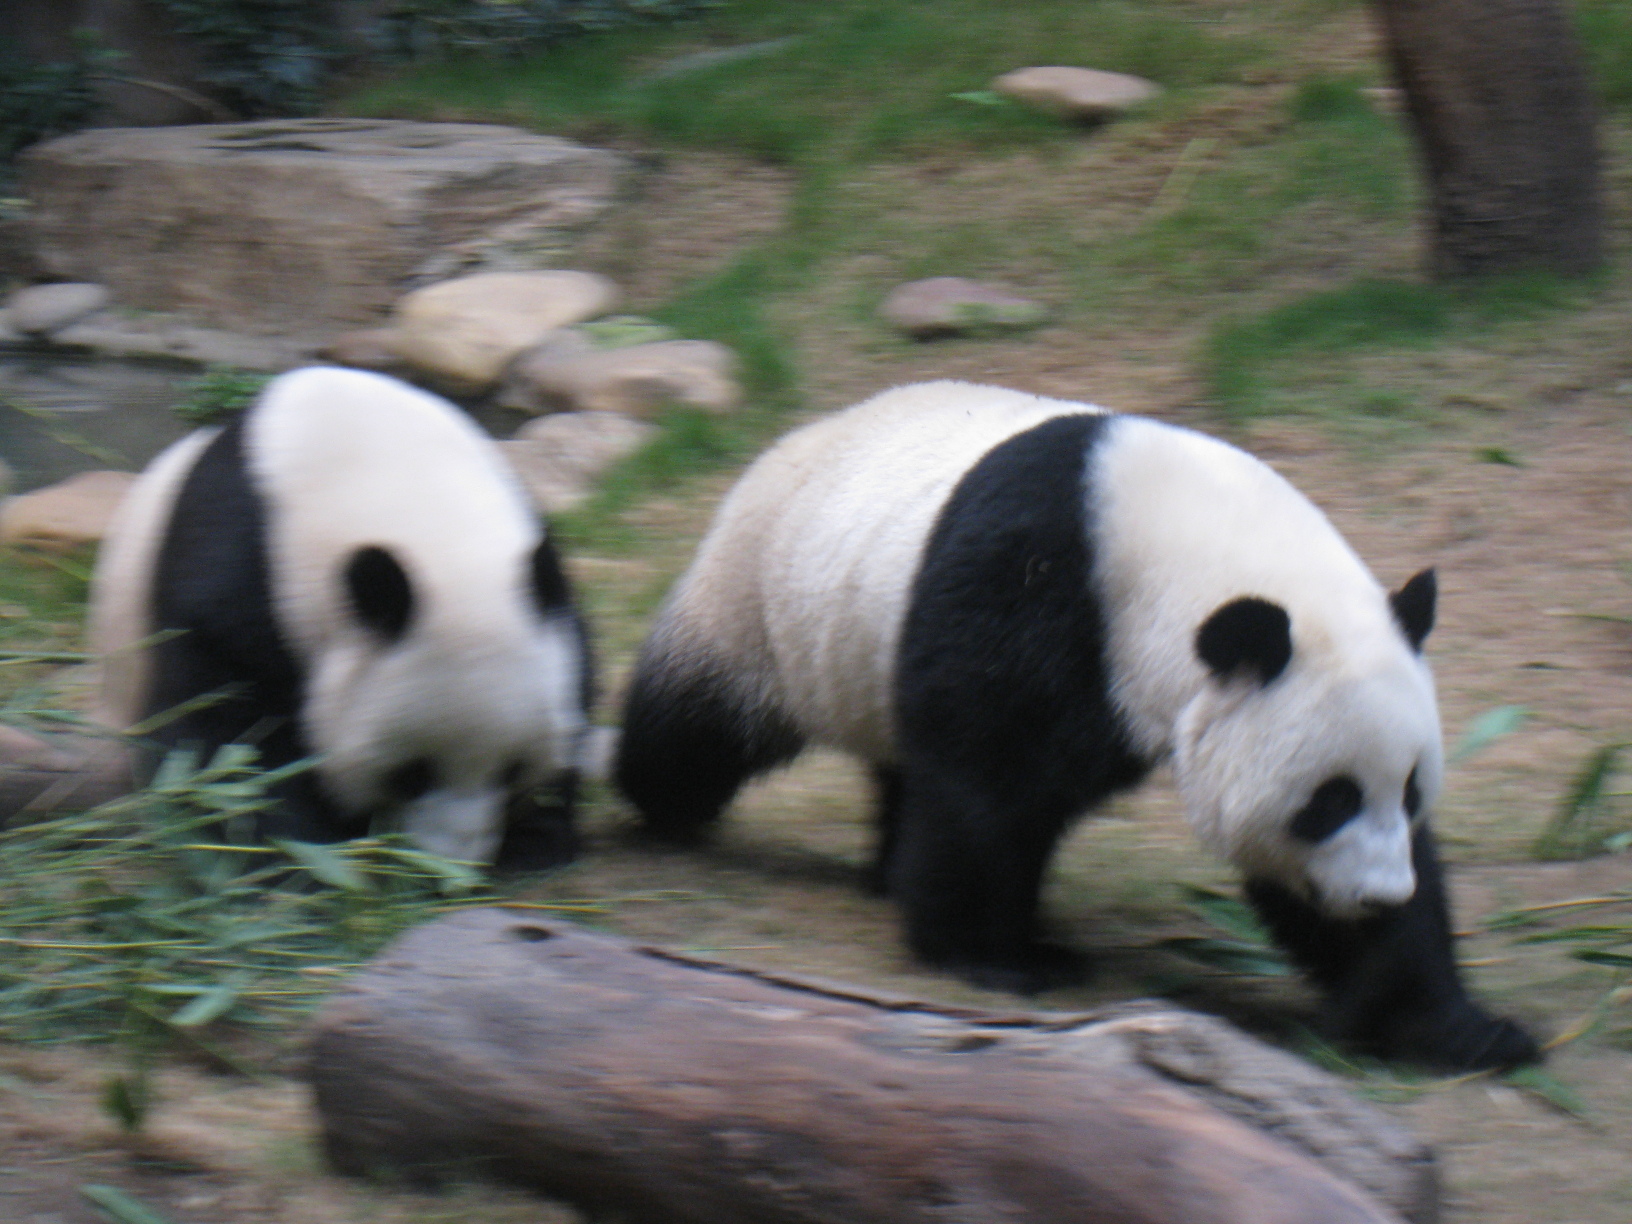 a group of pandas in a zoo walking together